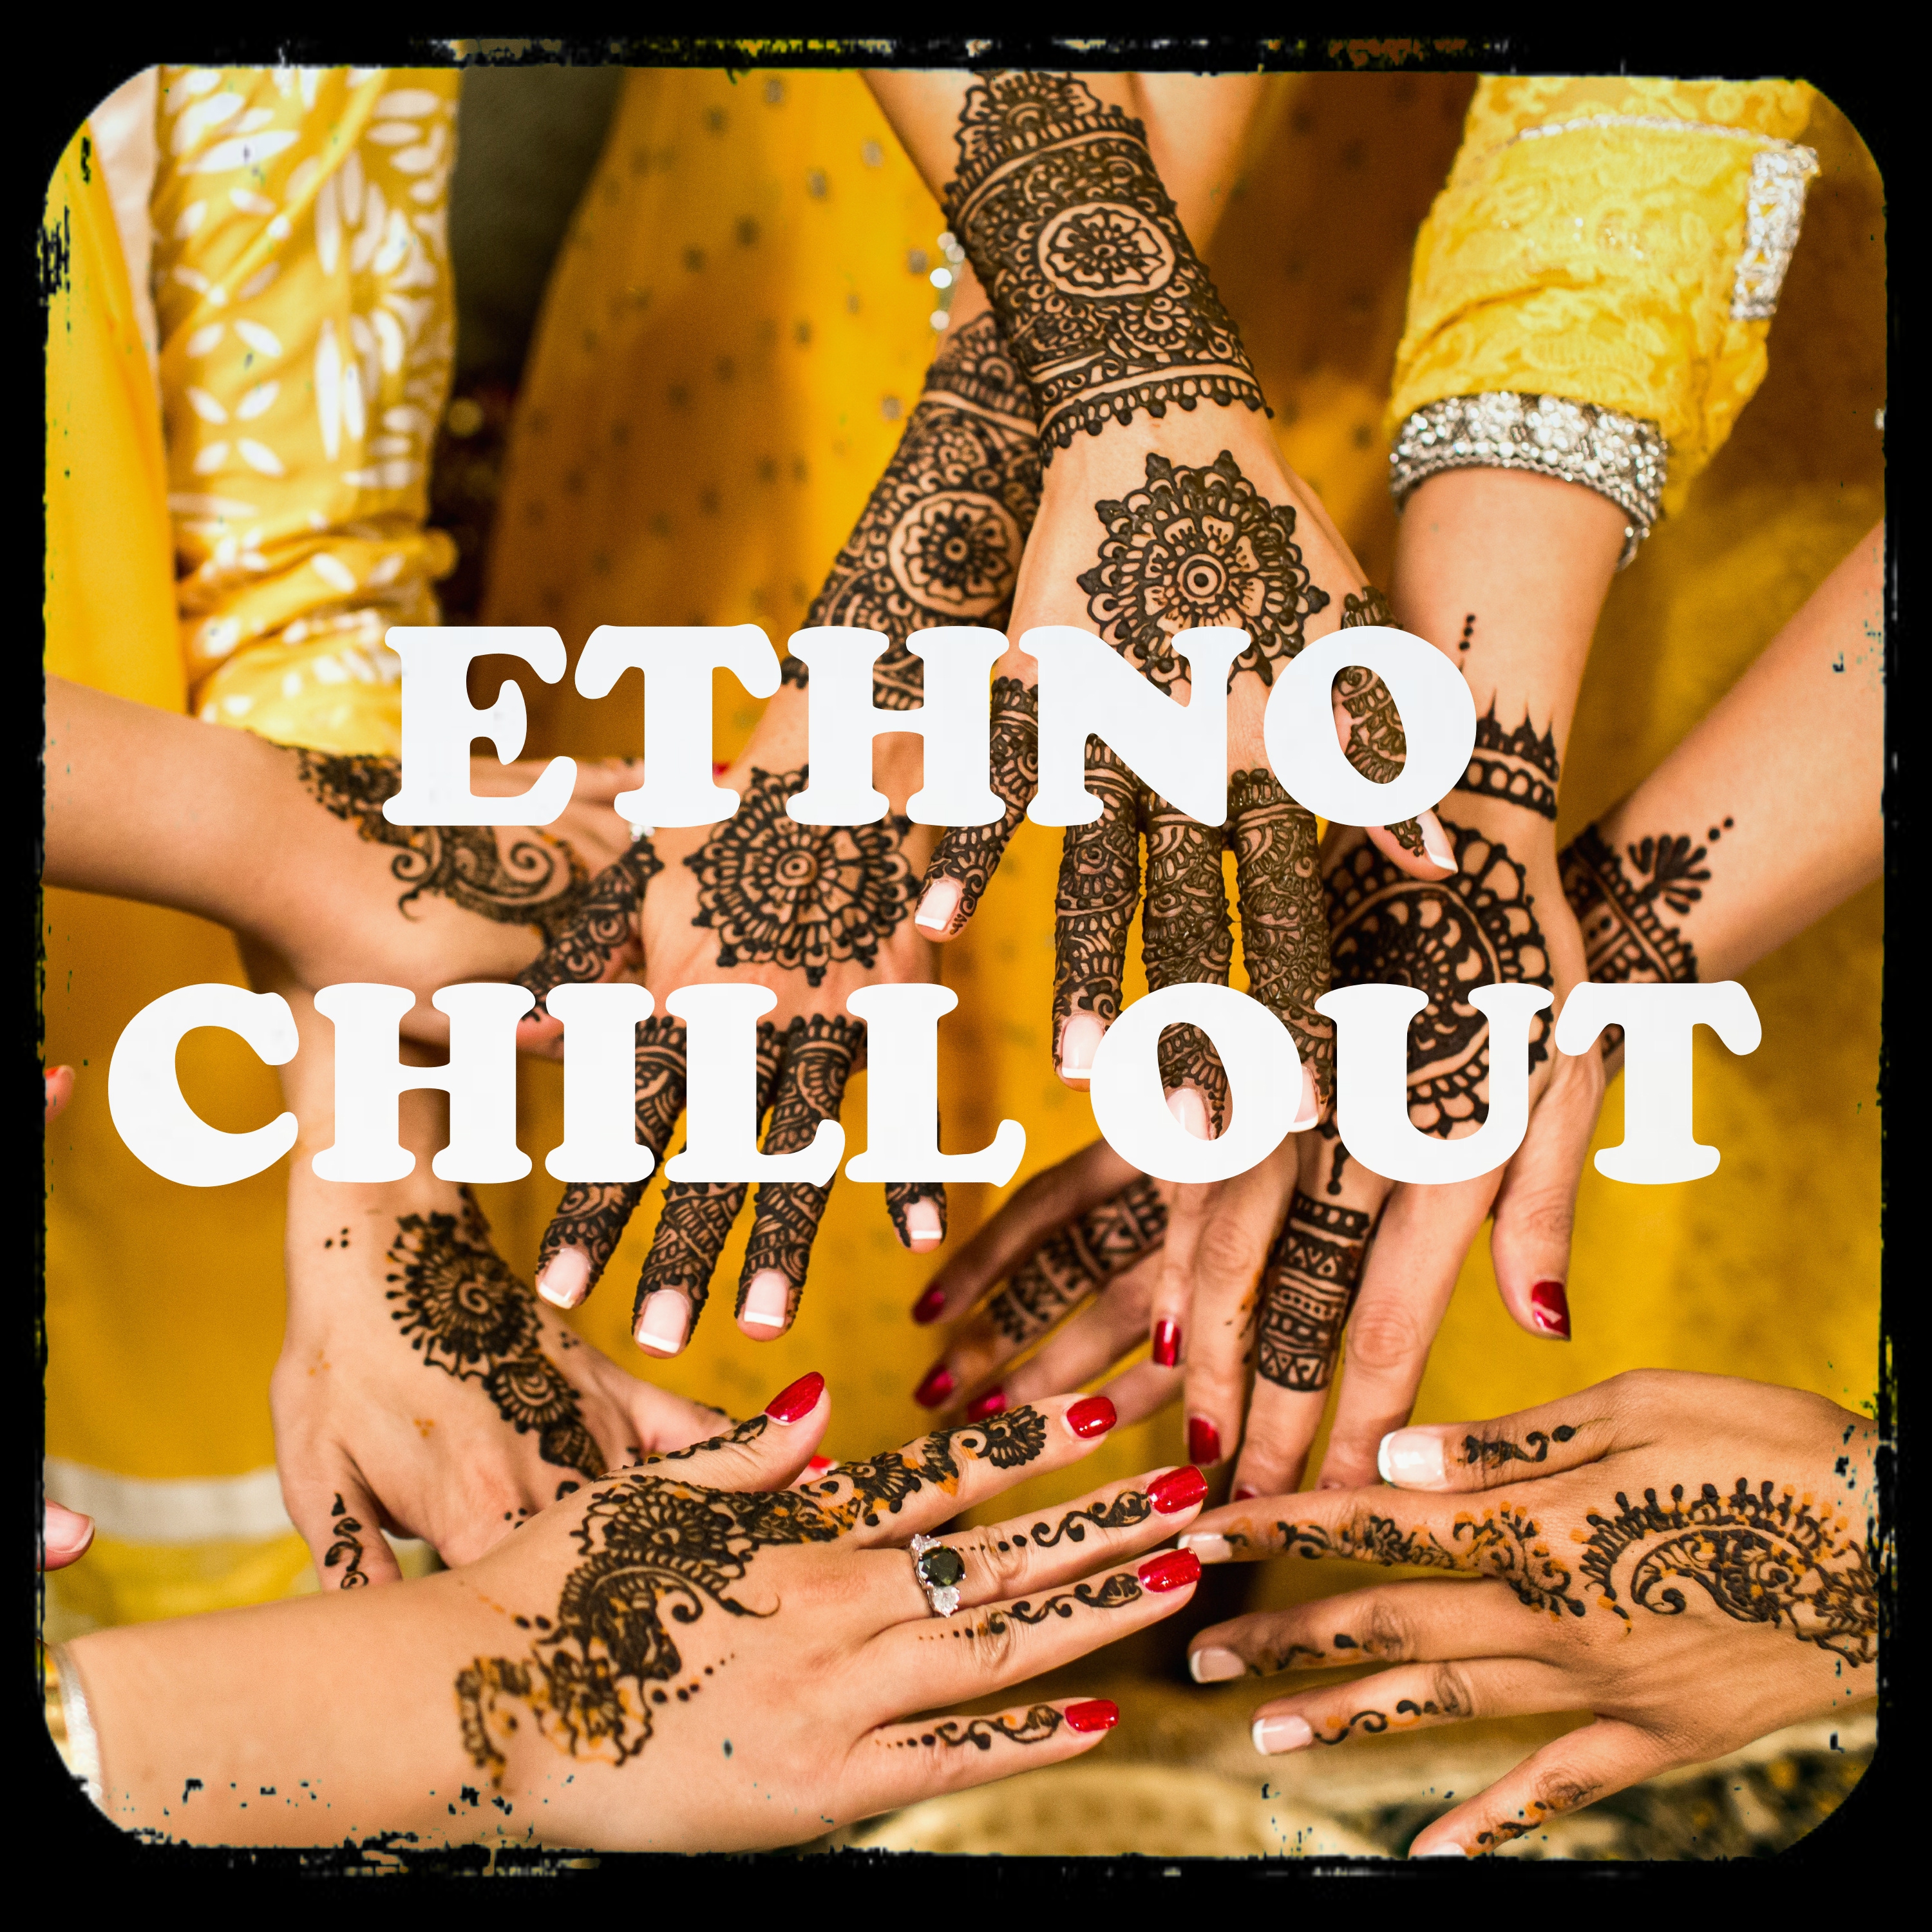 Ethno Chill Out